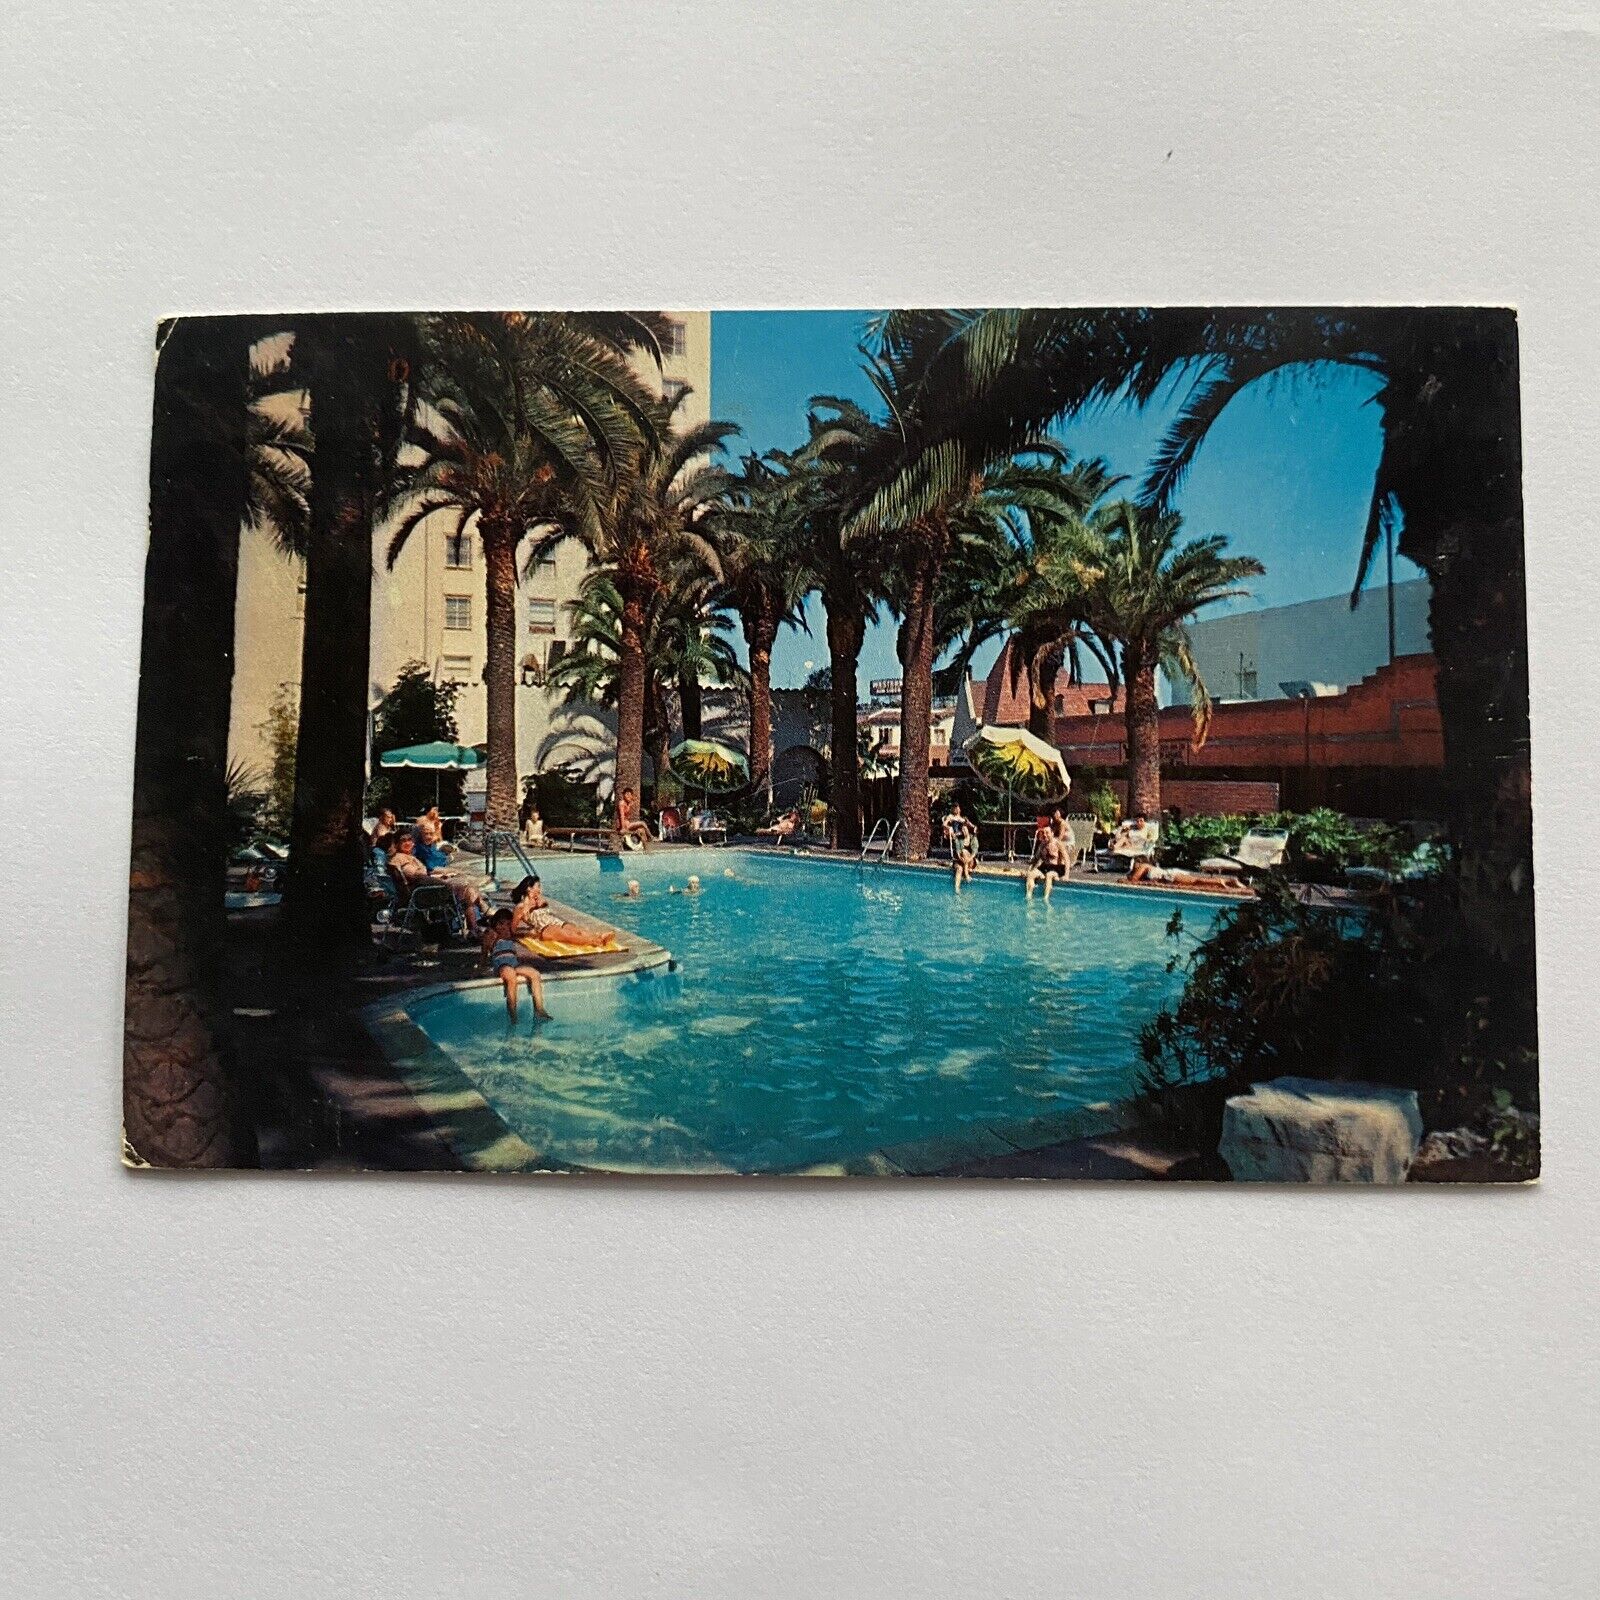 Hollywood Plaza Hotel Pool View Postcard Posted 1958